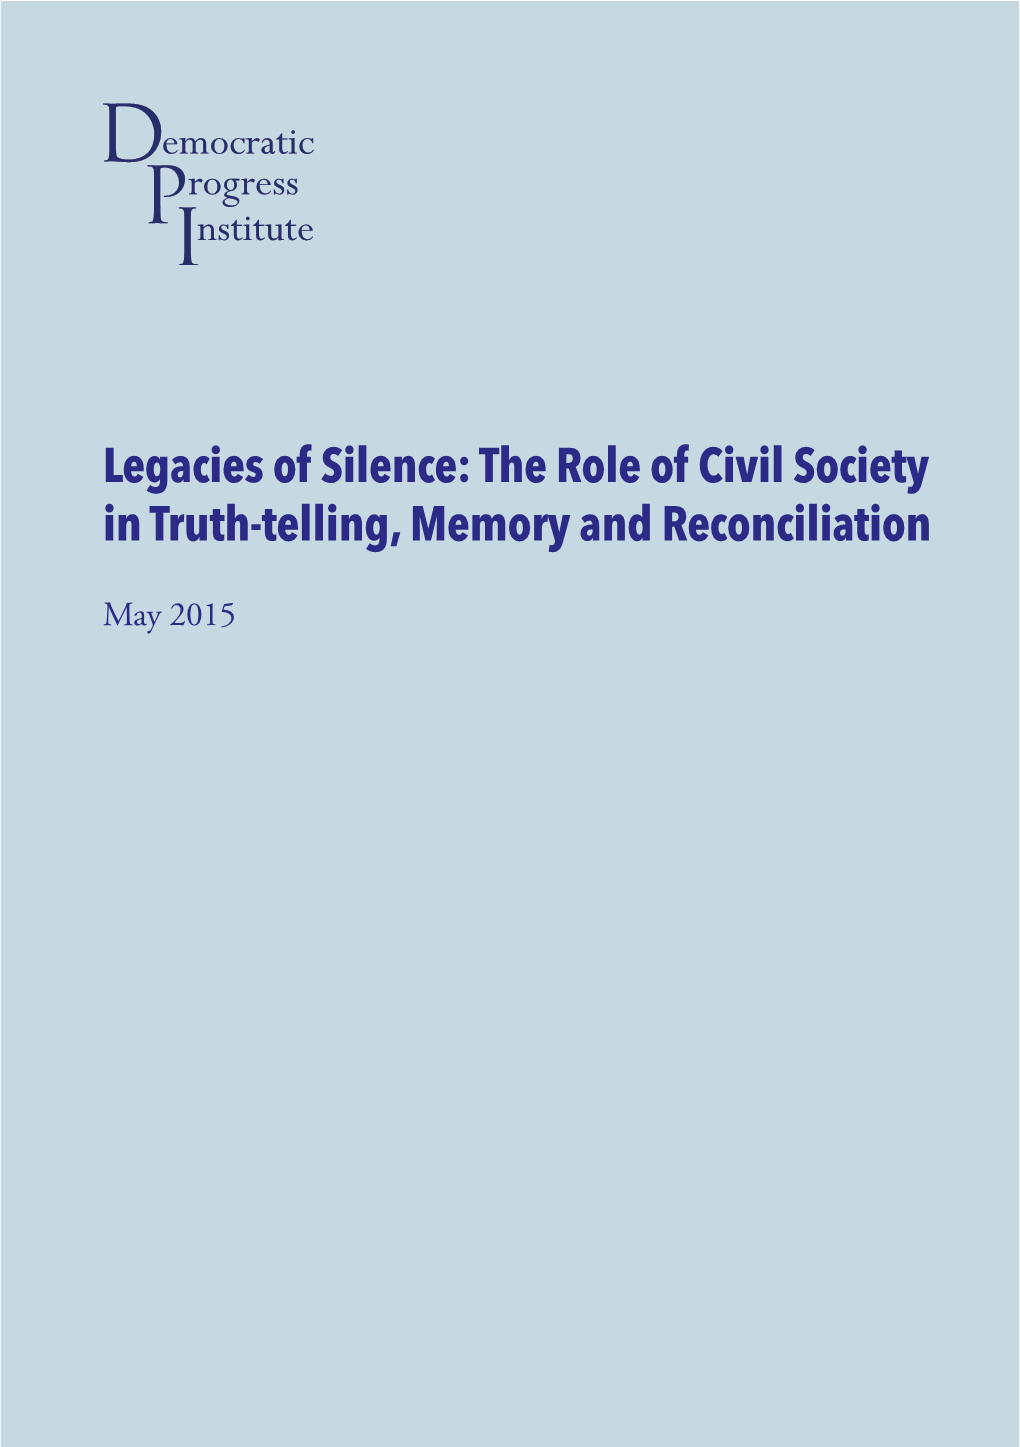 Legacies of Silence: the Role of Civil Society in Truth-Telling, Memory and Reconciliation